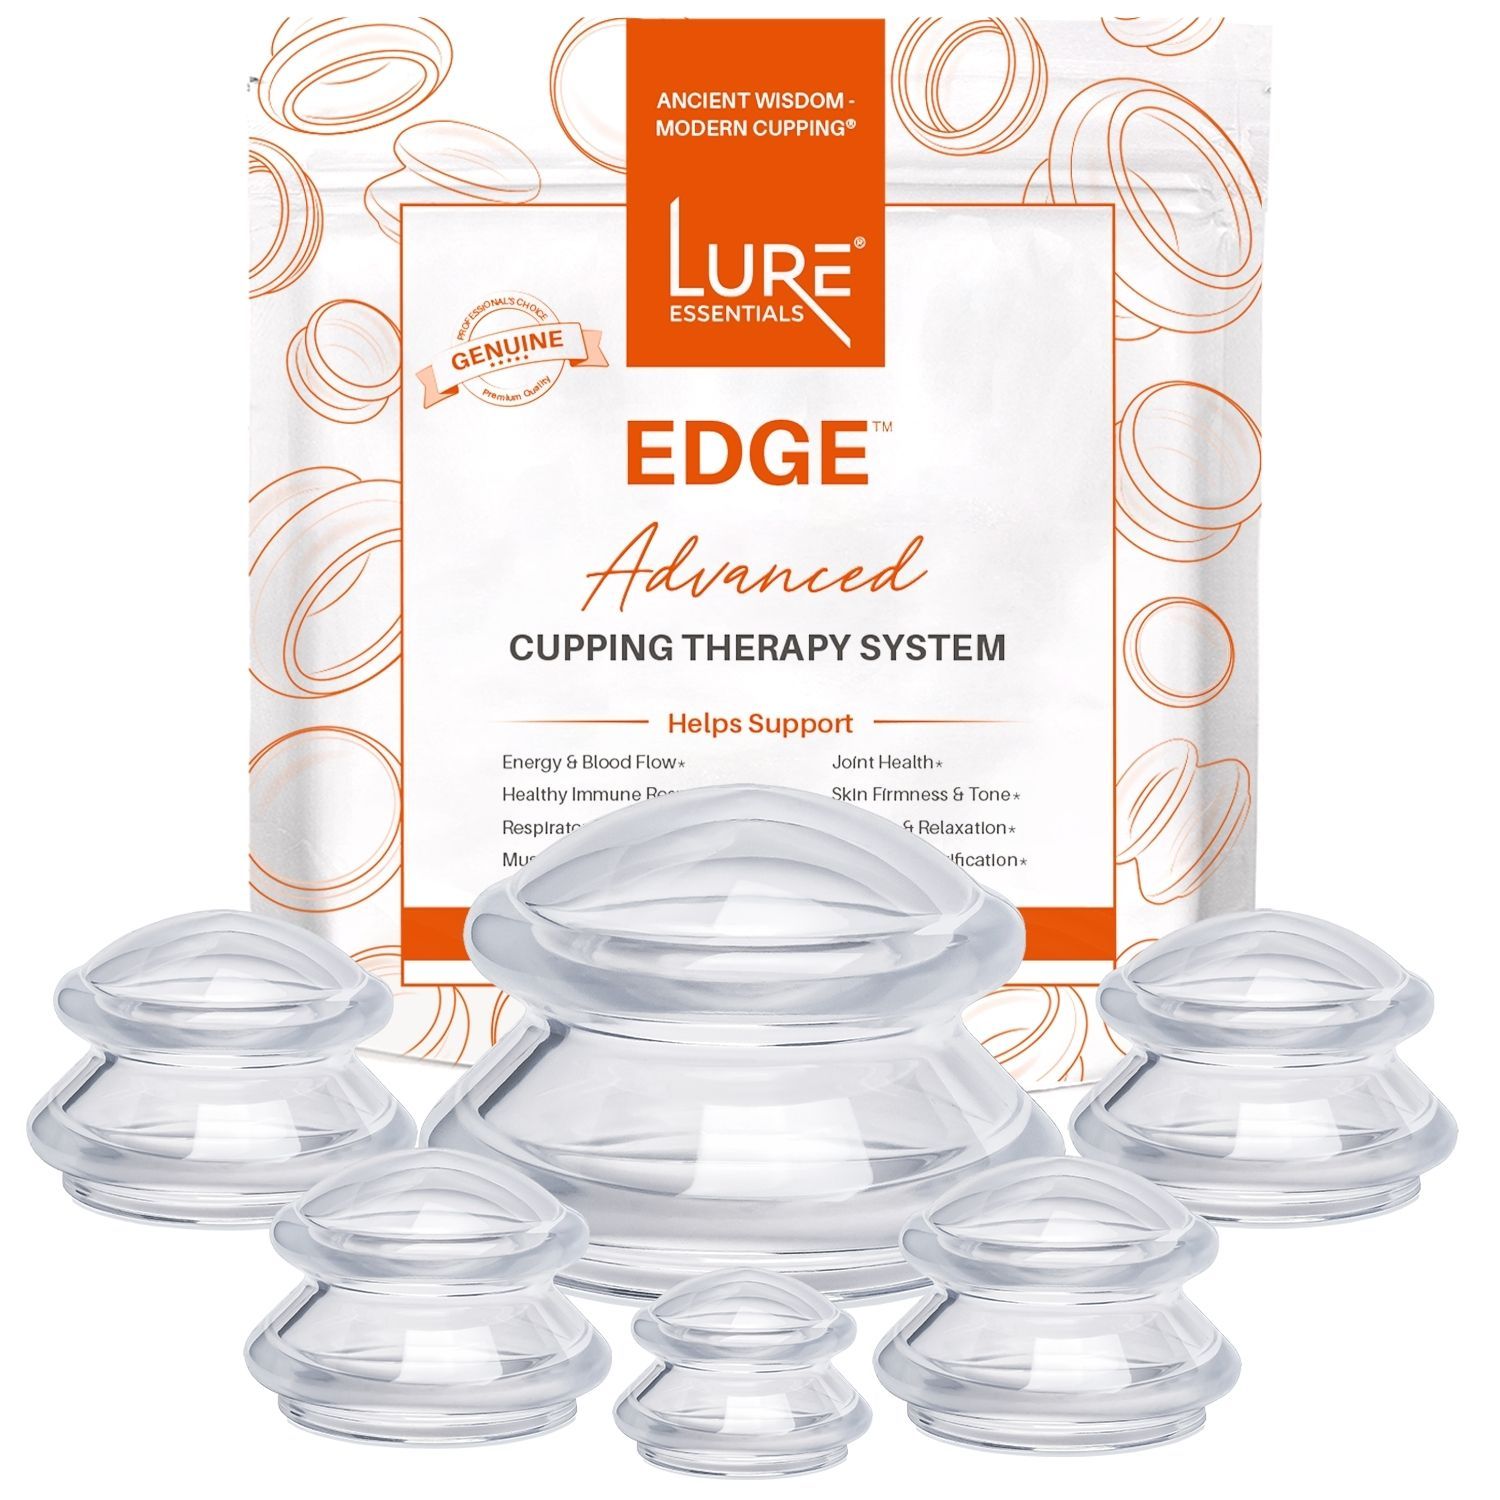 LURE Essentials Edge Cupping Therapy Set - Cupping Kit for Massage Therapy  - Silicone Cupping Set - Massage Cups for Cupping Therapy (Set of 4, Green)